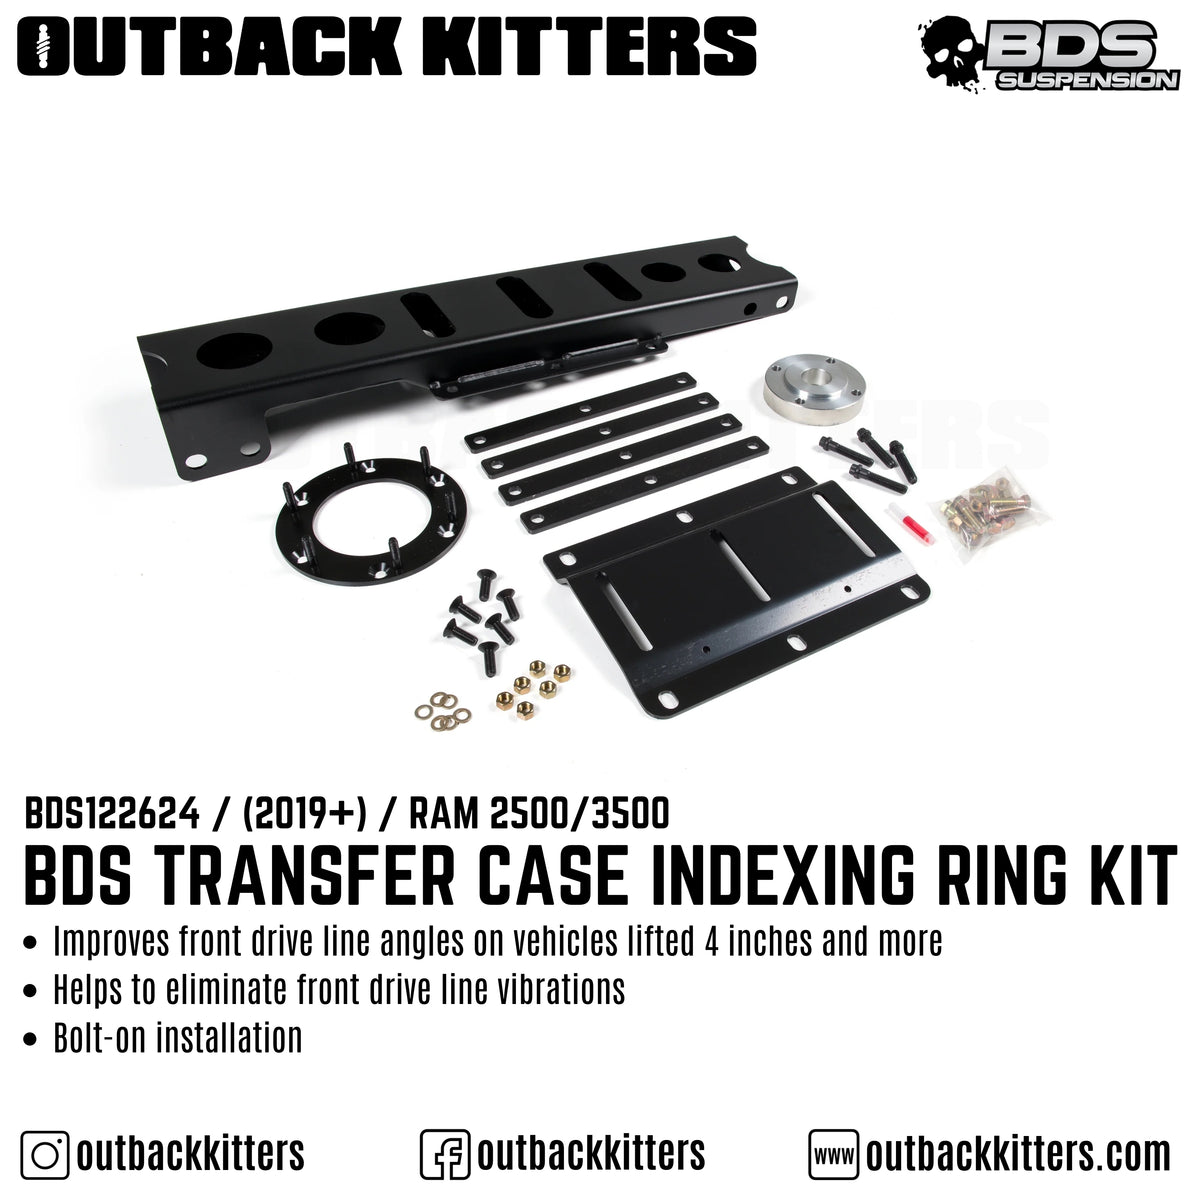 BDS Suspension 2019+ Ram 2500/3500 Transfer Case Indexing Ring Kit - Outback Kitters